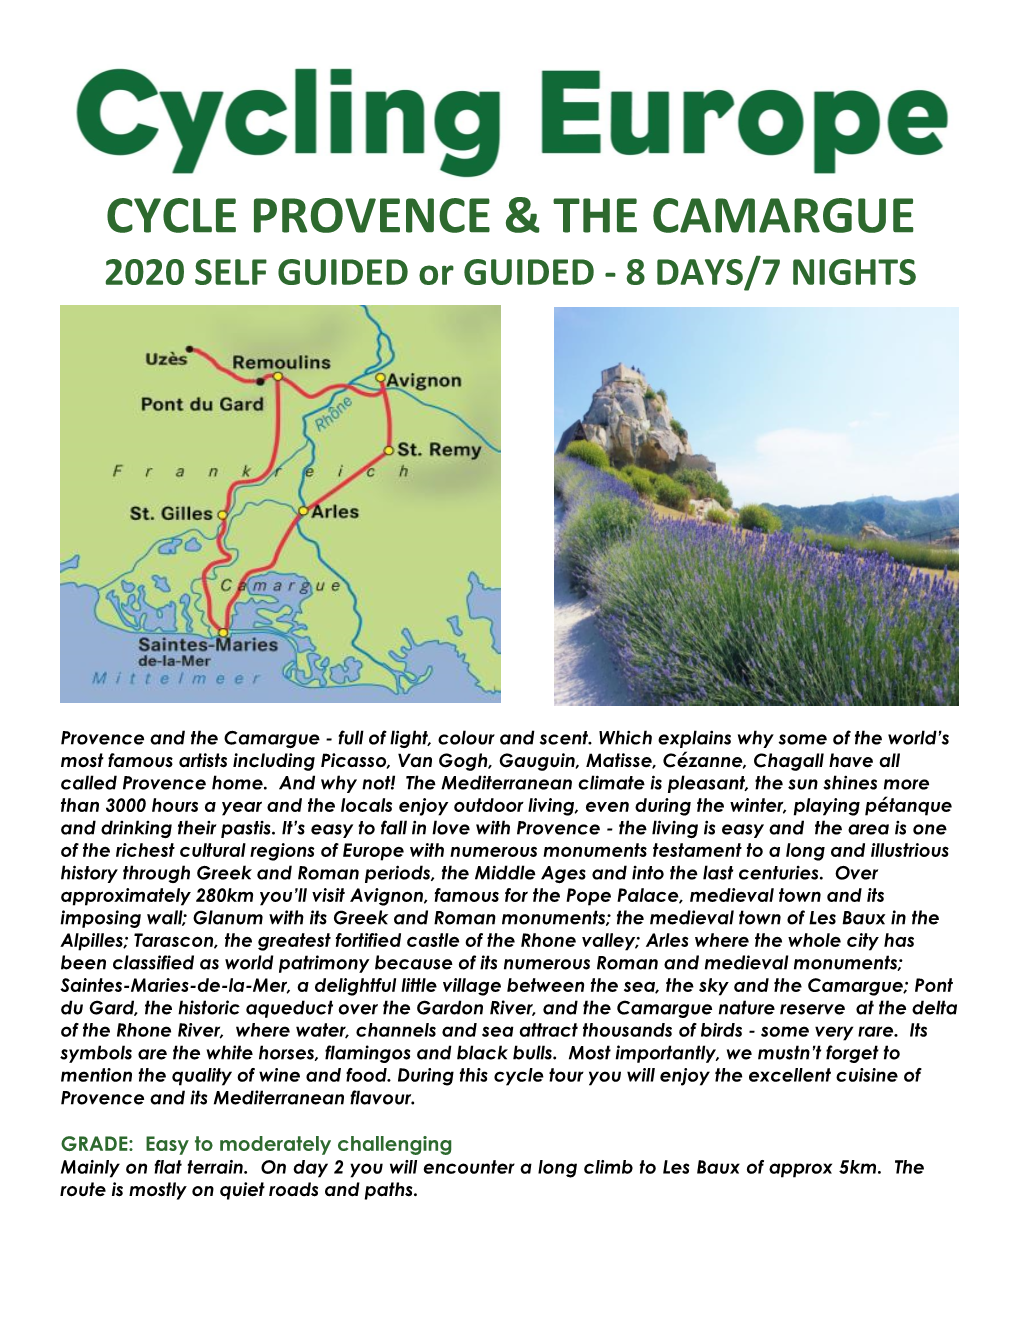 Cycle Provence & the Camargue